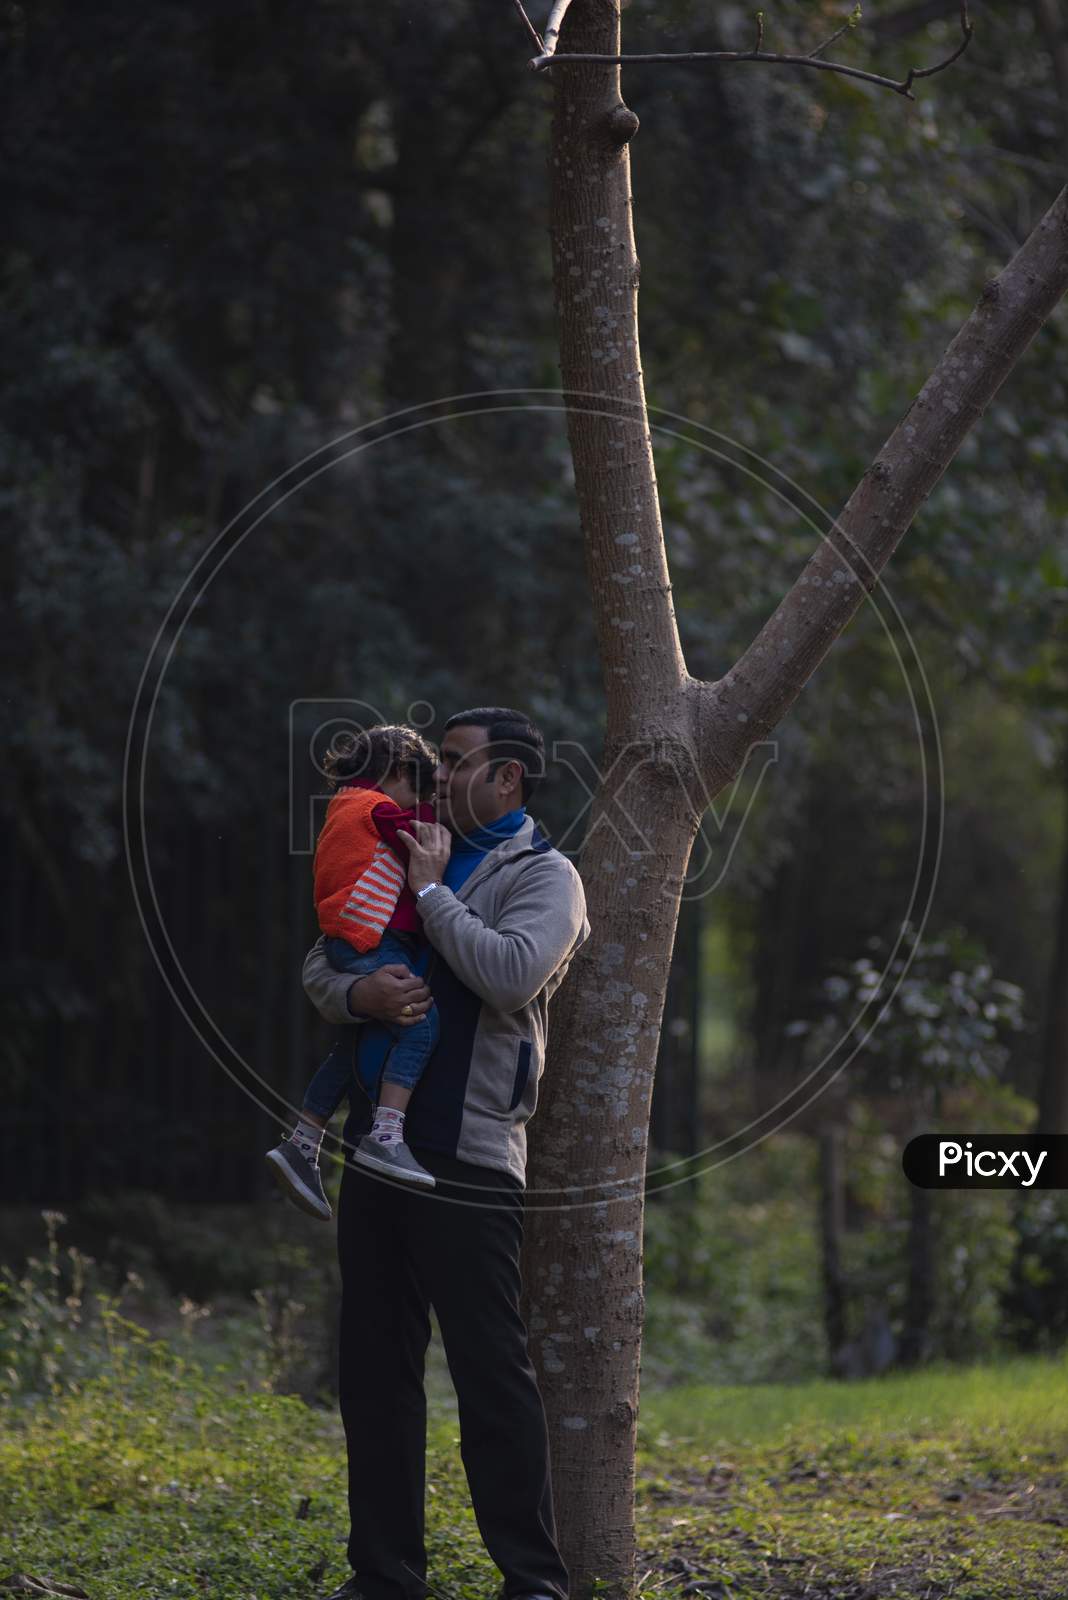 An Indian brunette father and his baby boy in winter garments enjoying themselves in winter afternoon on a  green grass field in forest background. Indian lifestyle and parenthood.